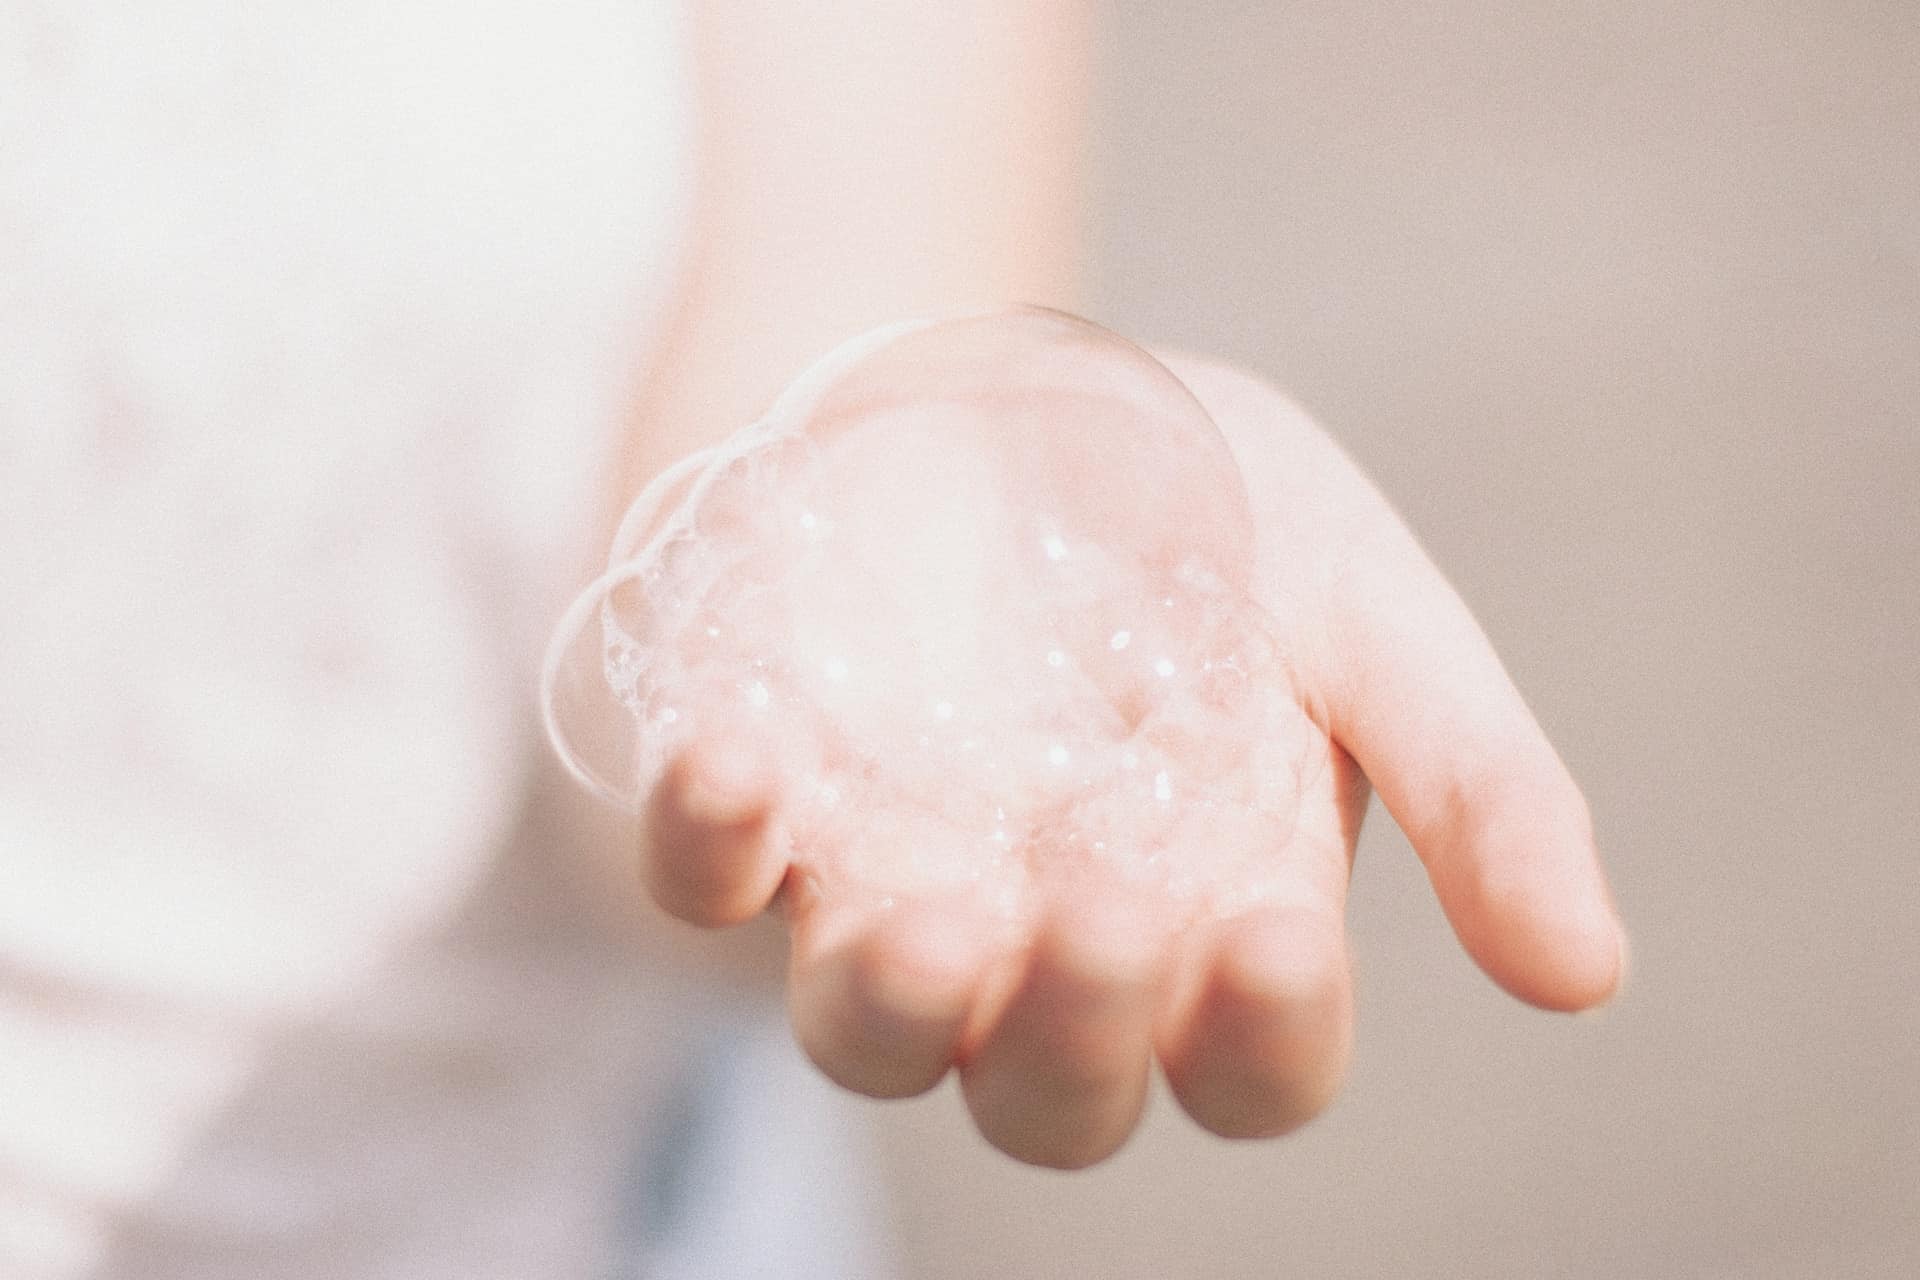 A person’s hand holding bubbles